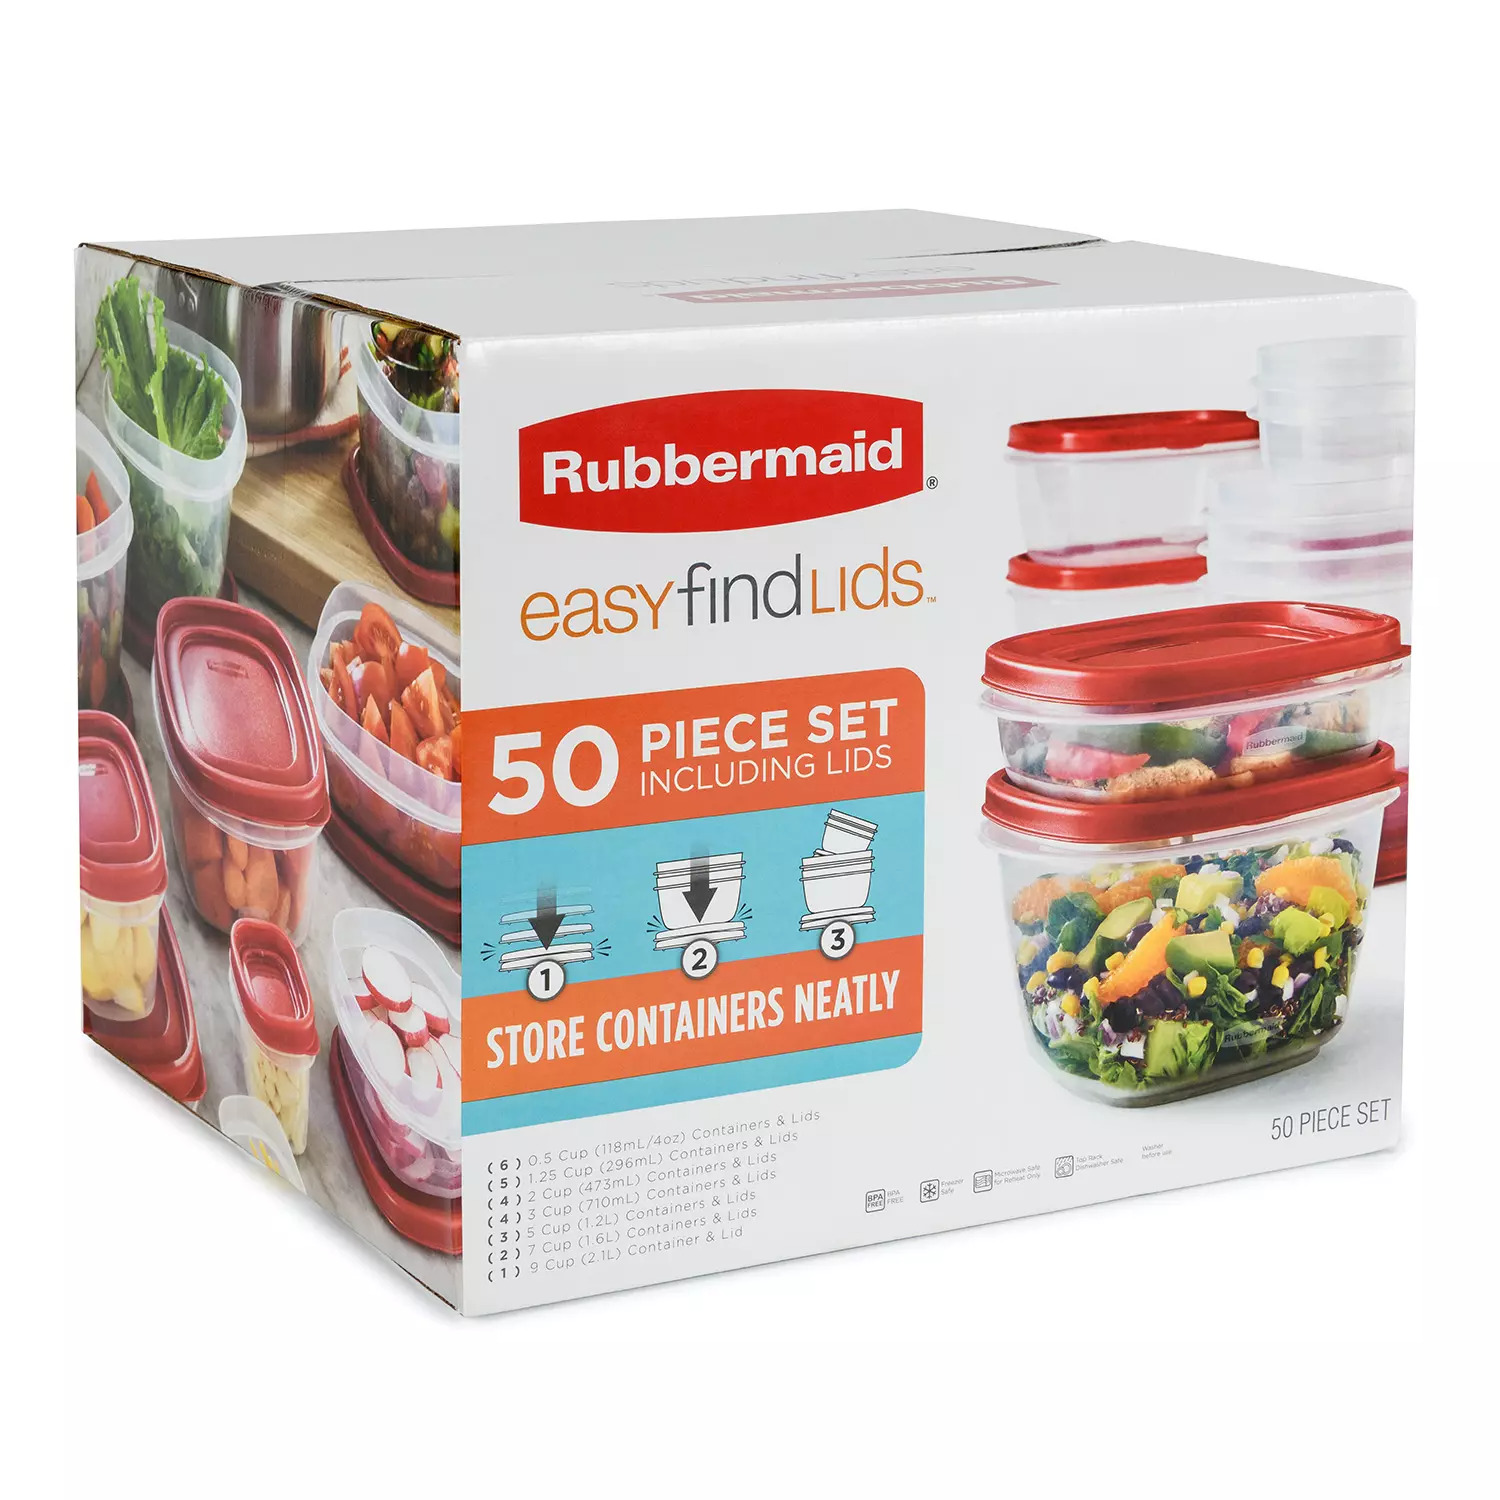 Rubbermaid 50 piece Easy Find Food Plastic Storage Containers Set Snapon Lids